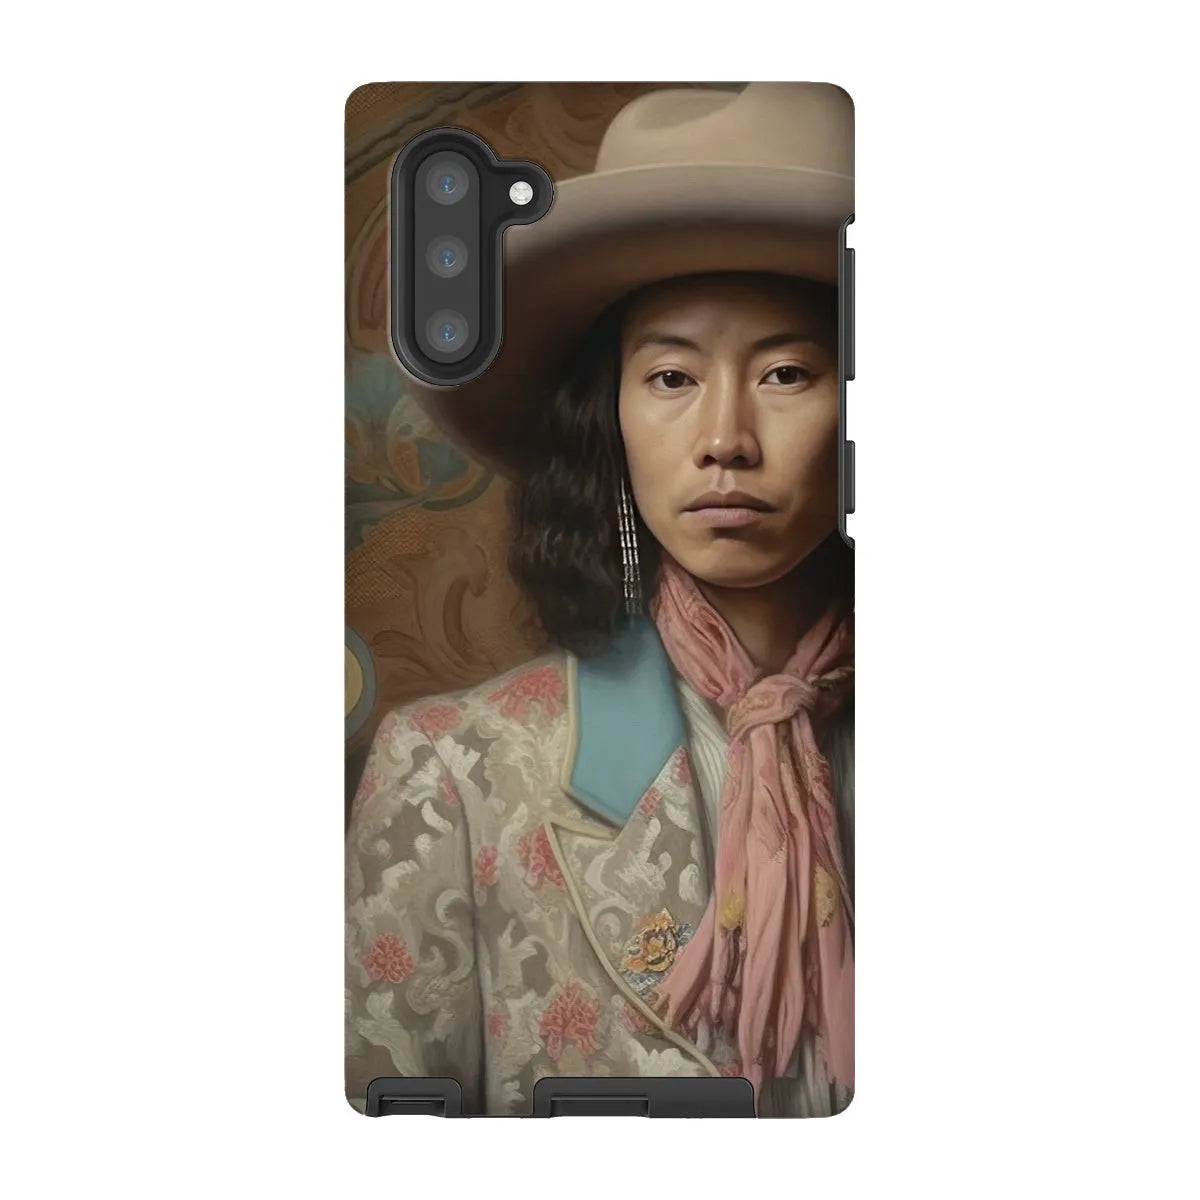 Dorjee The Gay Cowboy - Dandy Gay Aesthetic Art Phone Case - Samsung Galaxy Note 10 / Matte - Mobile Phone Cases